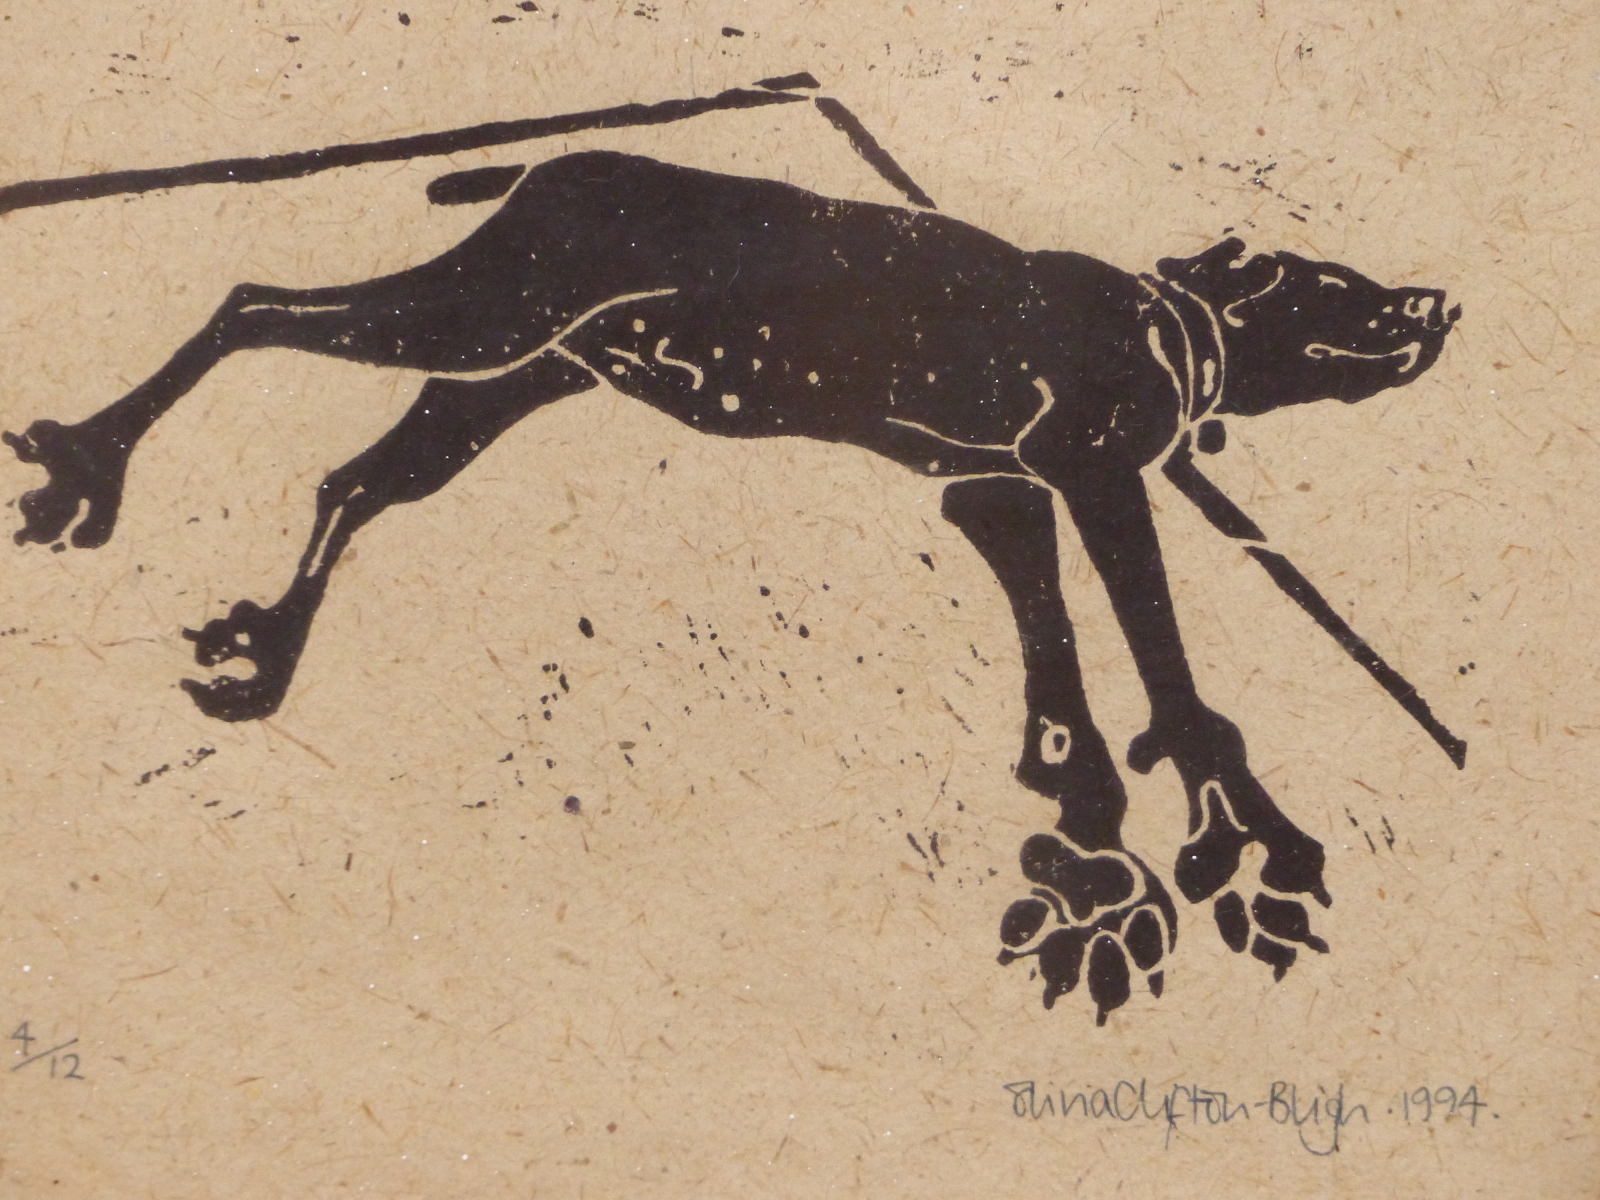 OLIVIA CLIFTON-BLIGH (B.1971) ARR, SLEEPING DOG, SIGNED, DATED 1994 AND NUMBERED 4/12, LINOCUT, 26 x - Image 2 of 4